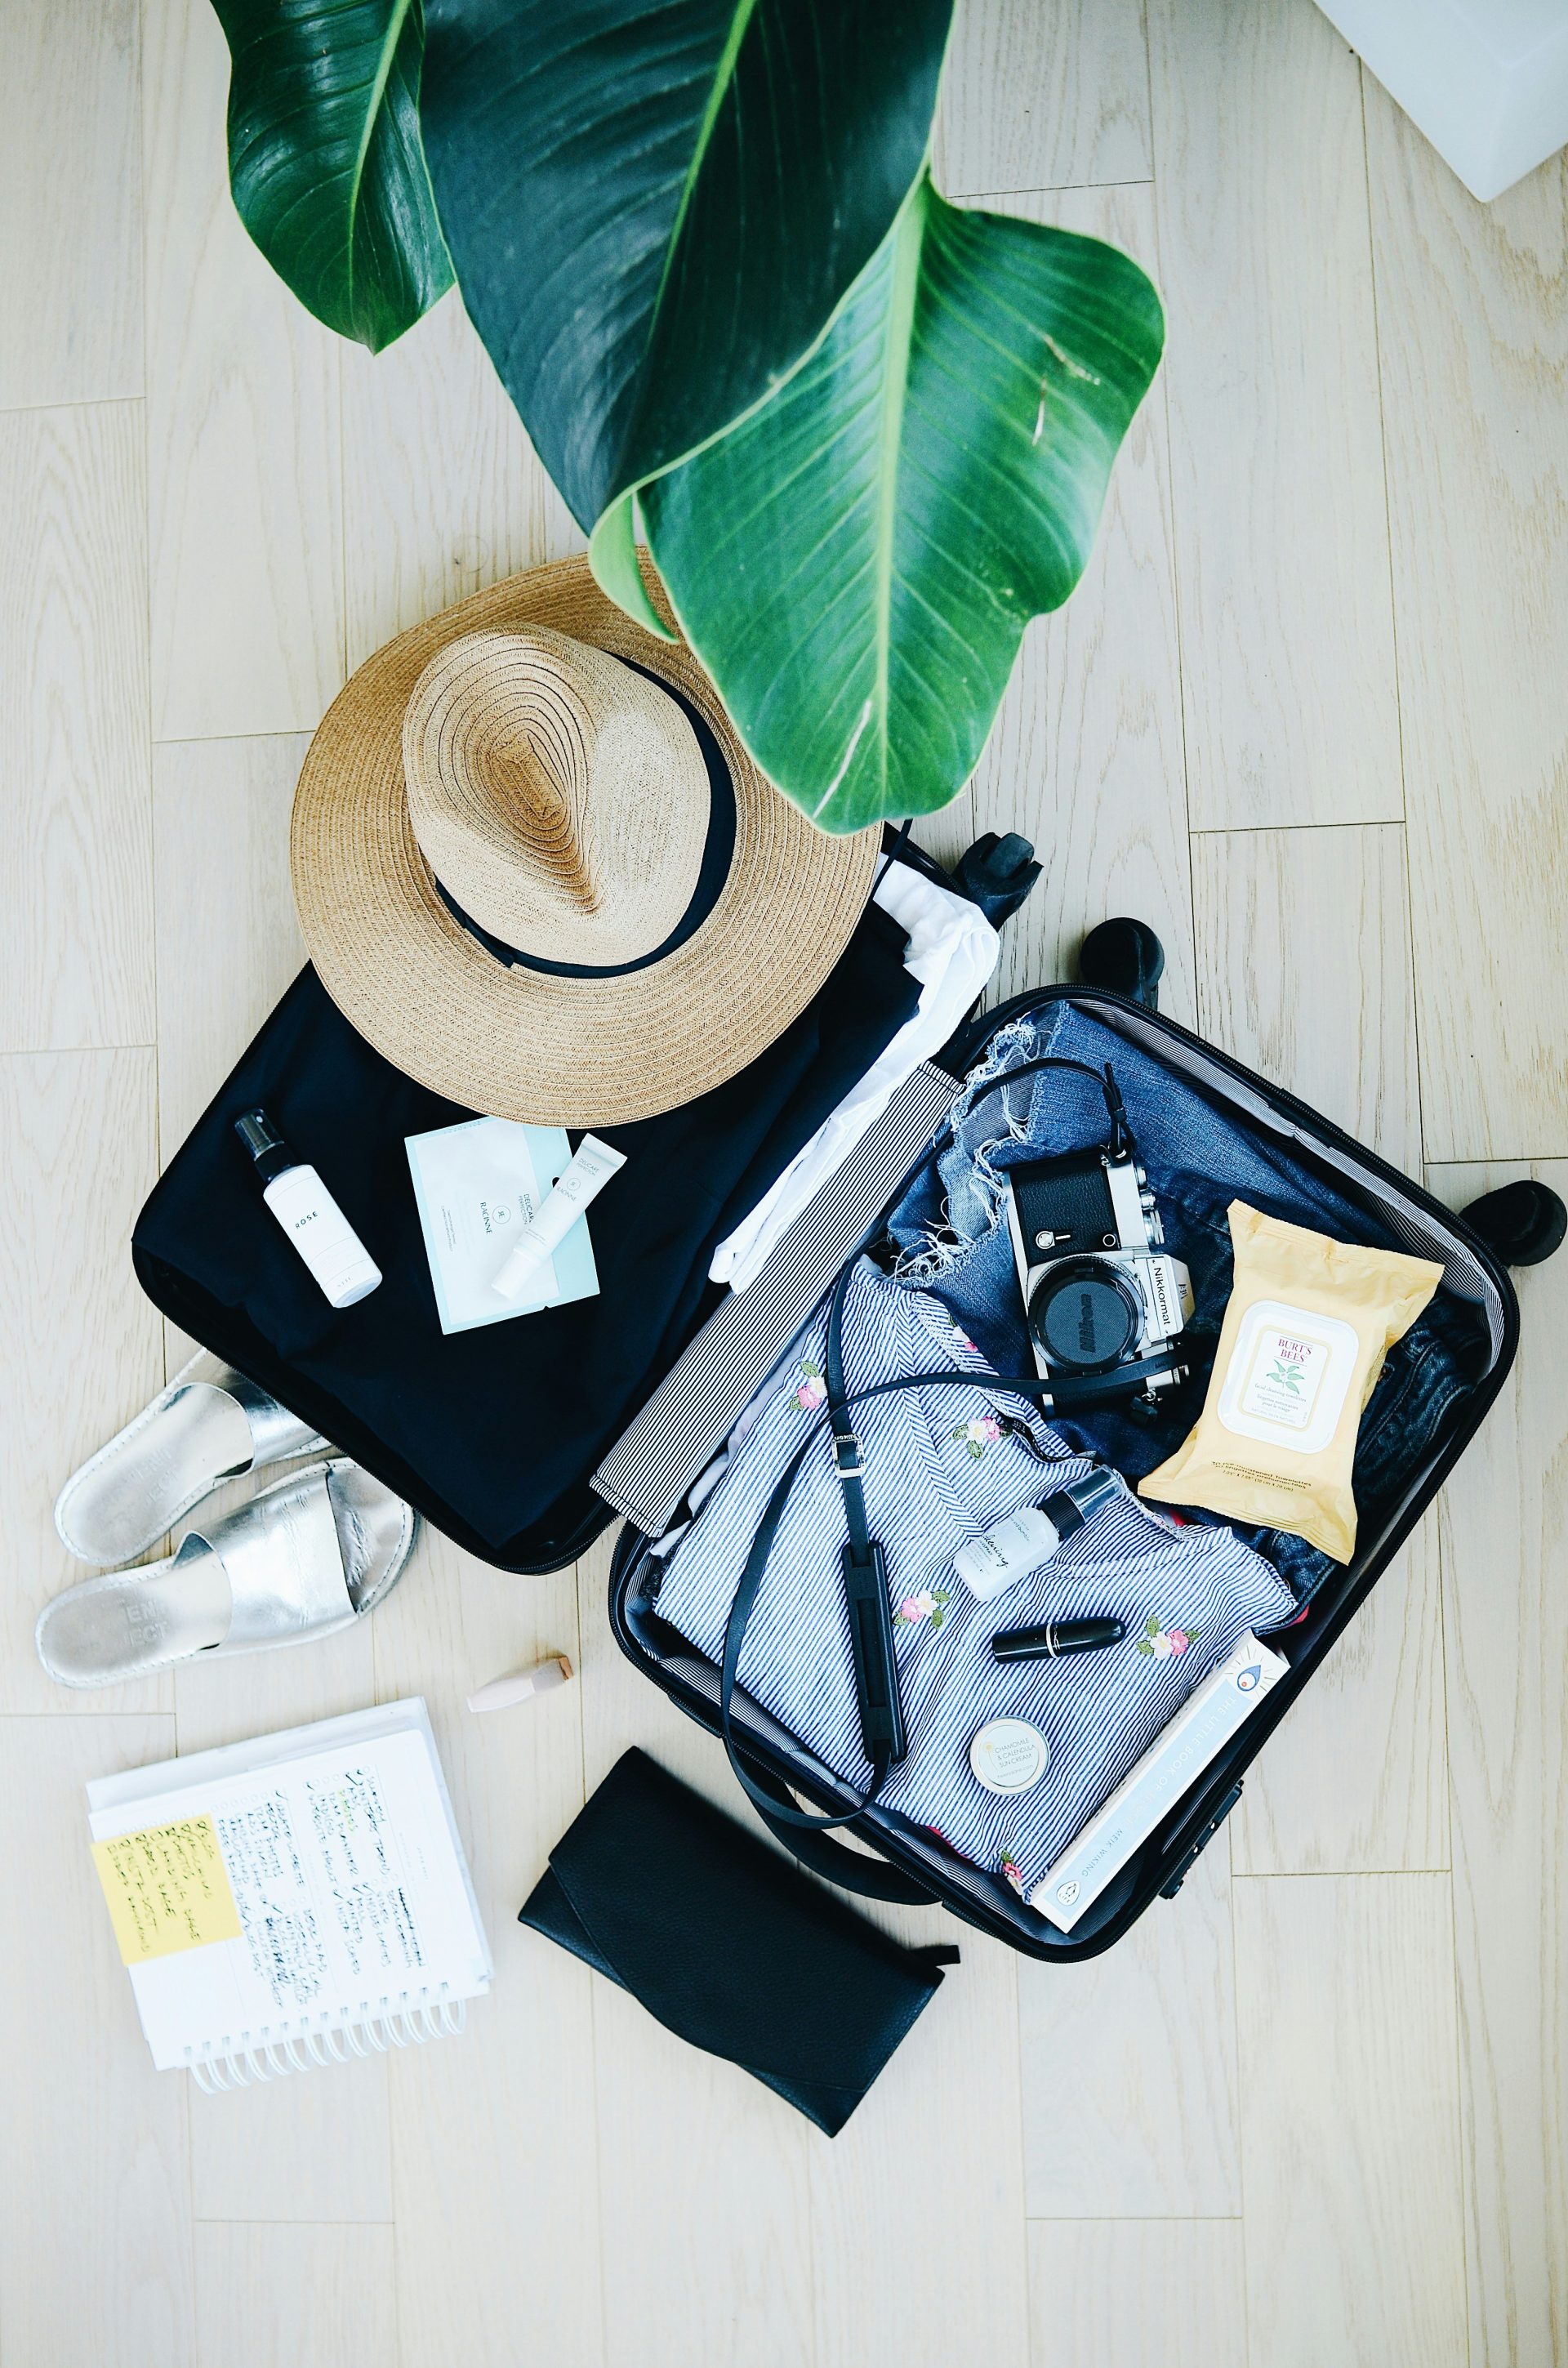 Flat lay image of suitcase and travel items like a hat and sunglasses